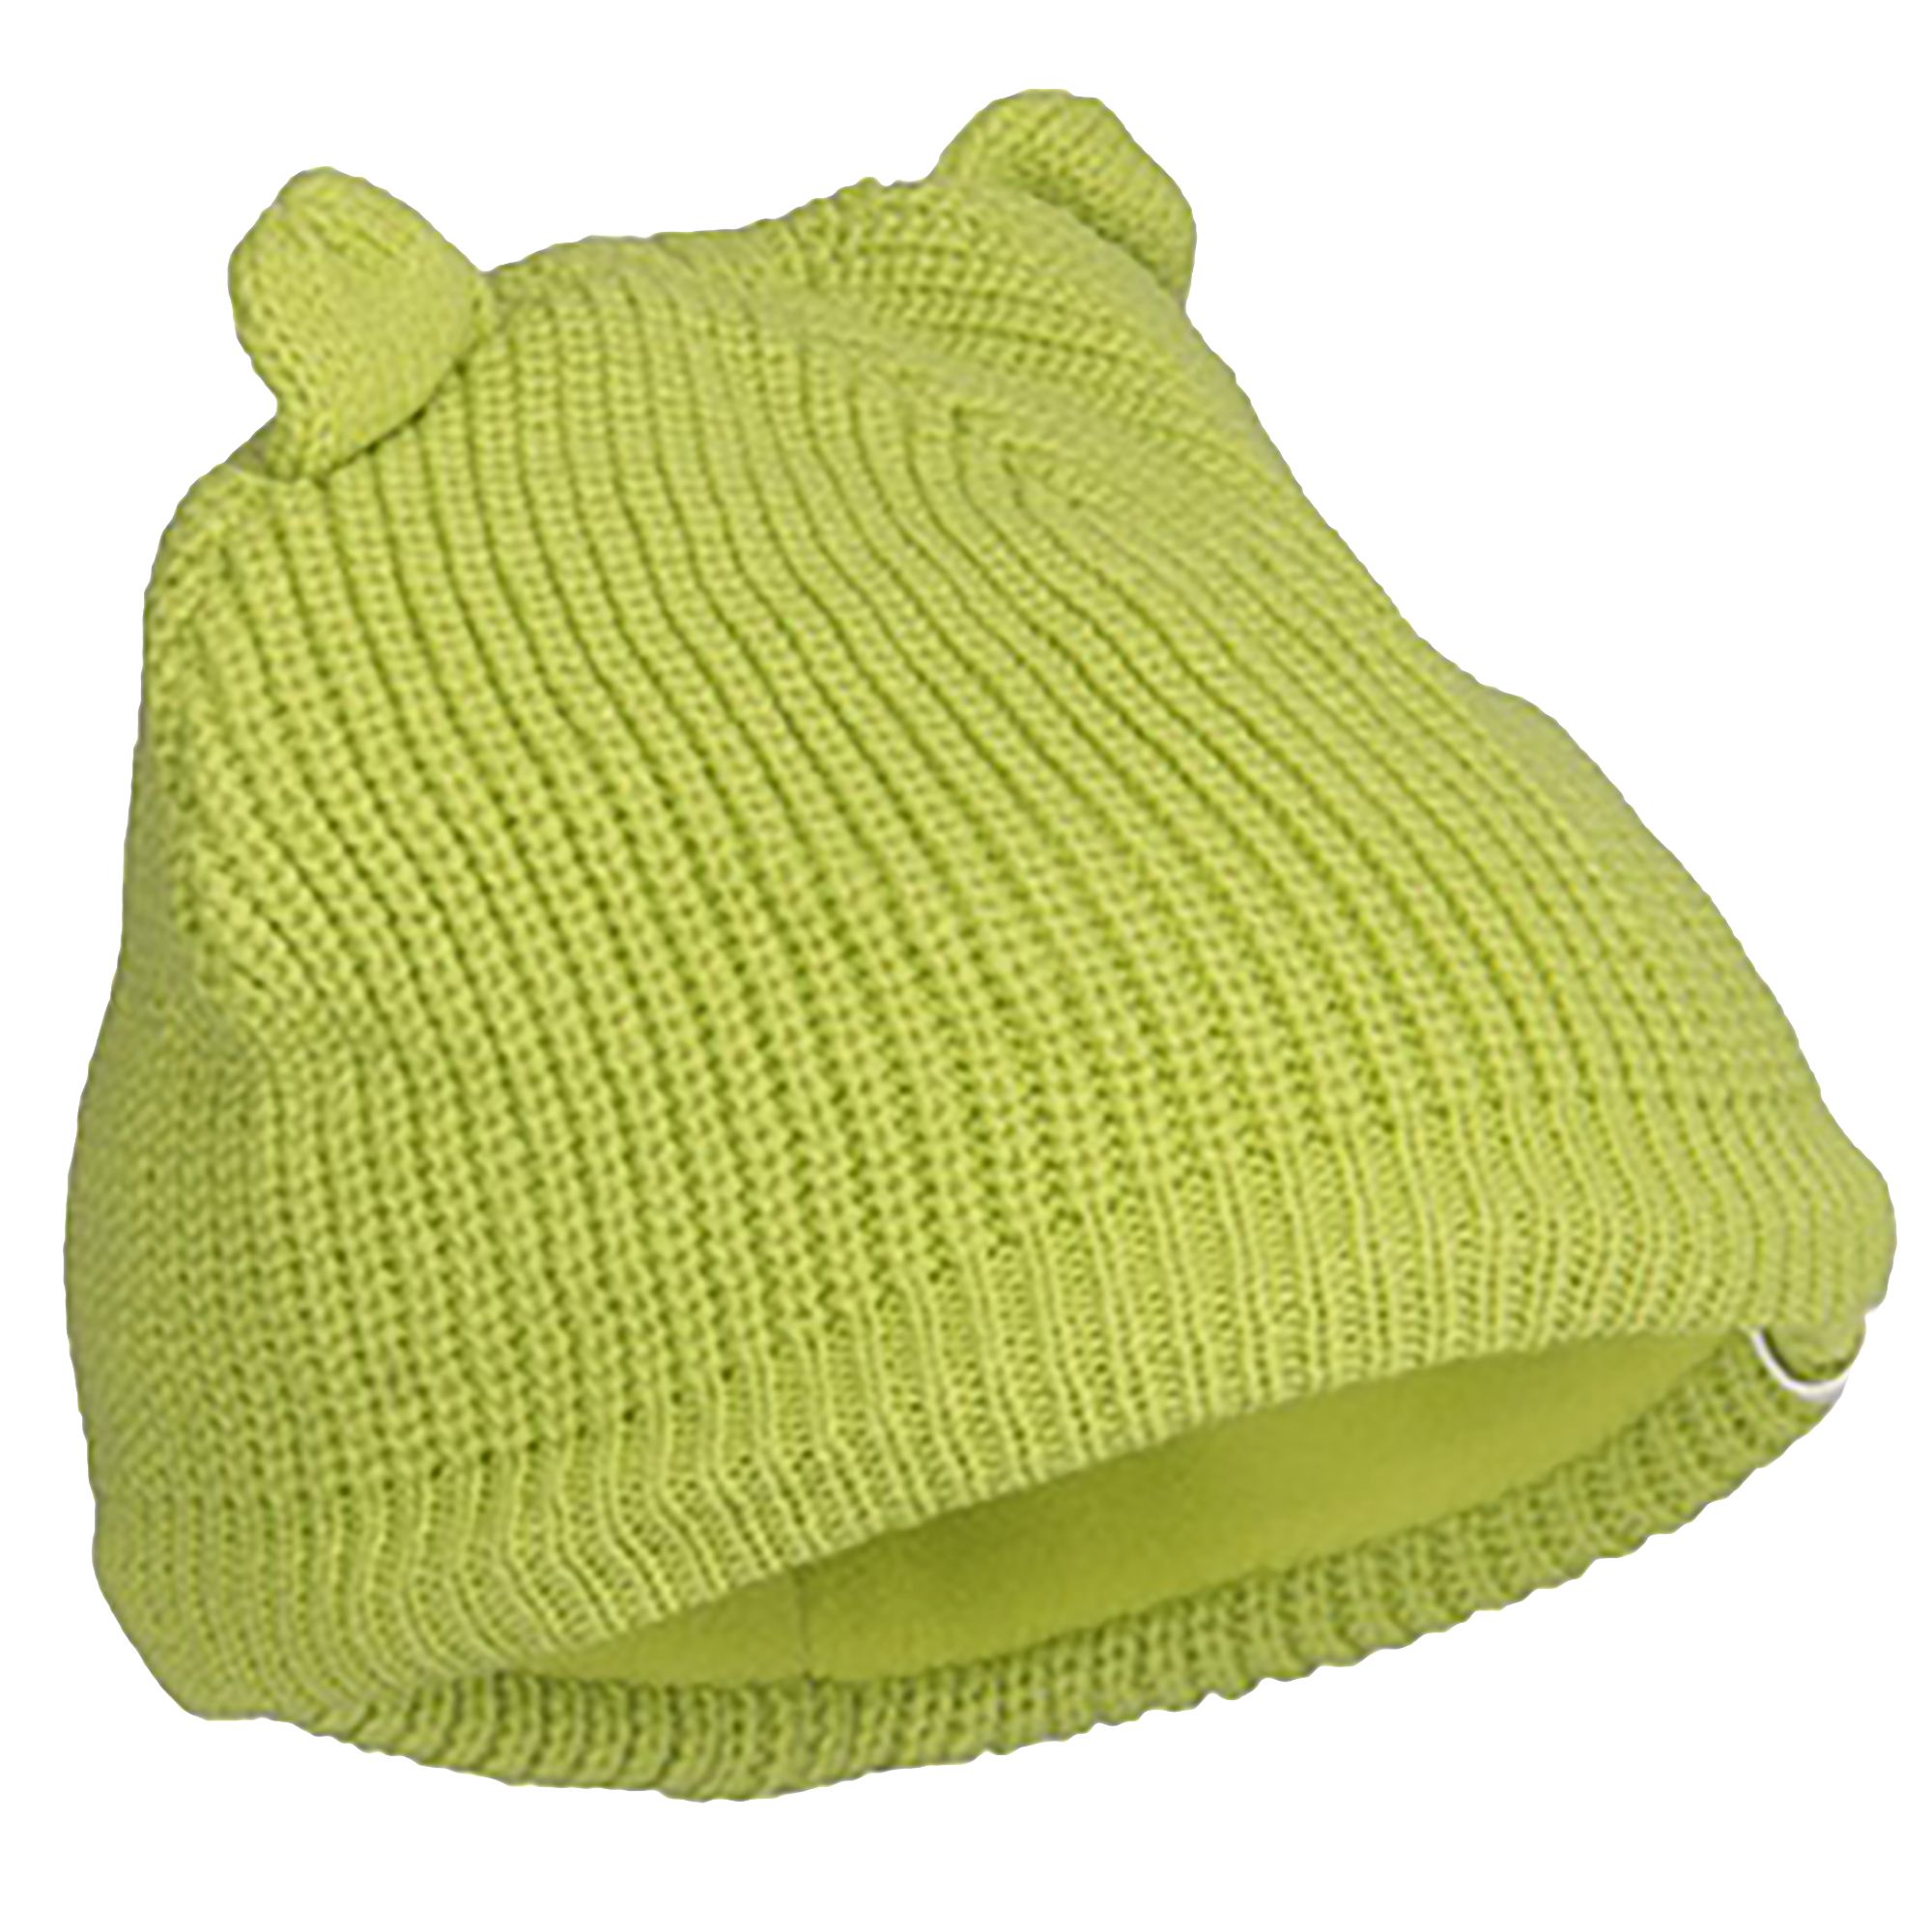 Knitted Beanie With Bear Ears. Fleece Lined. Woven Tab. Outer: 100% acrylic, Lining: 100% polyester fleece.